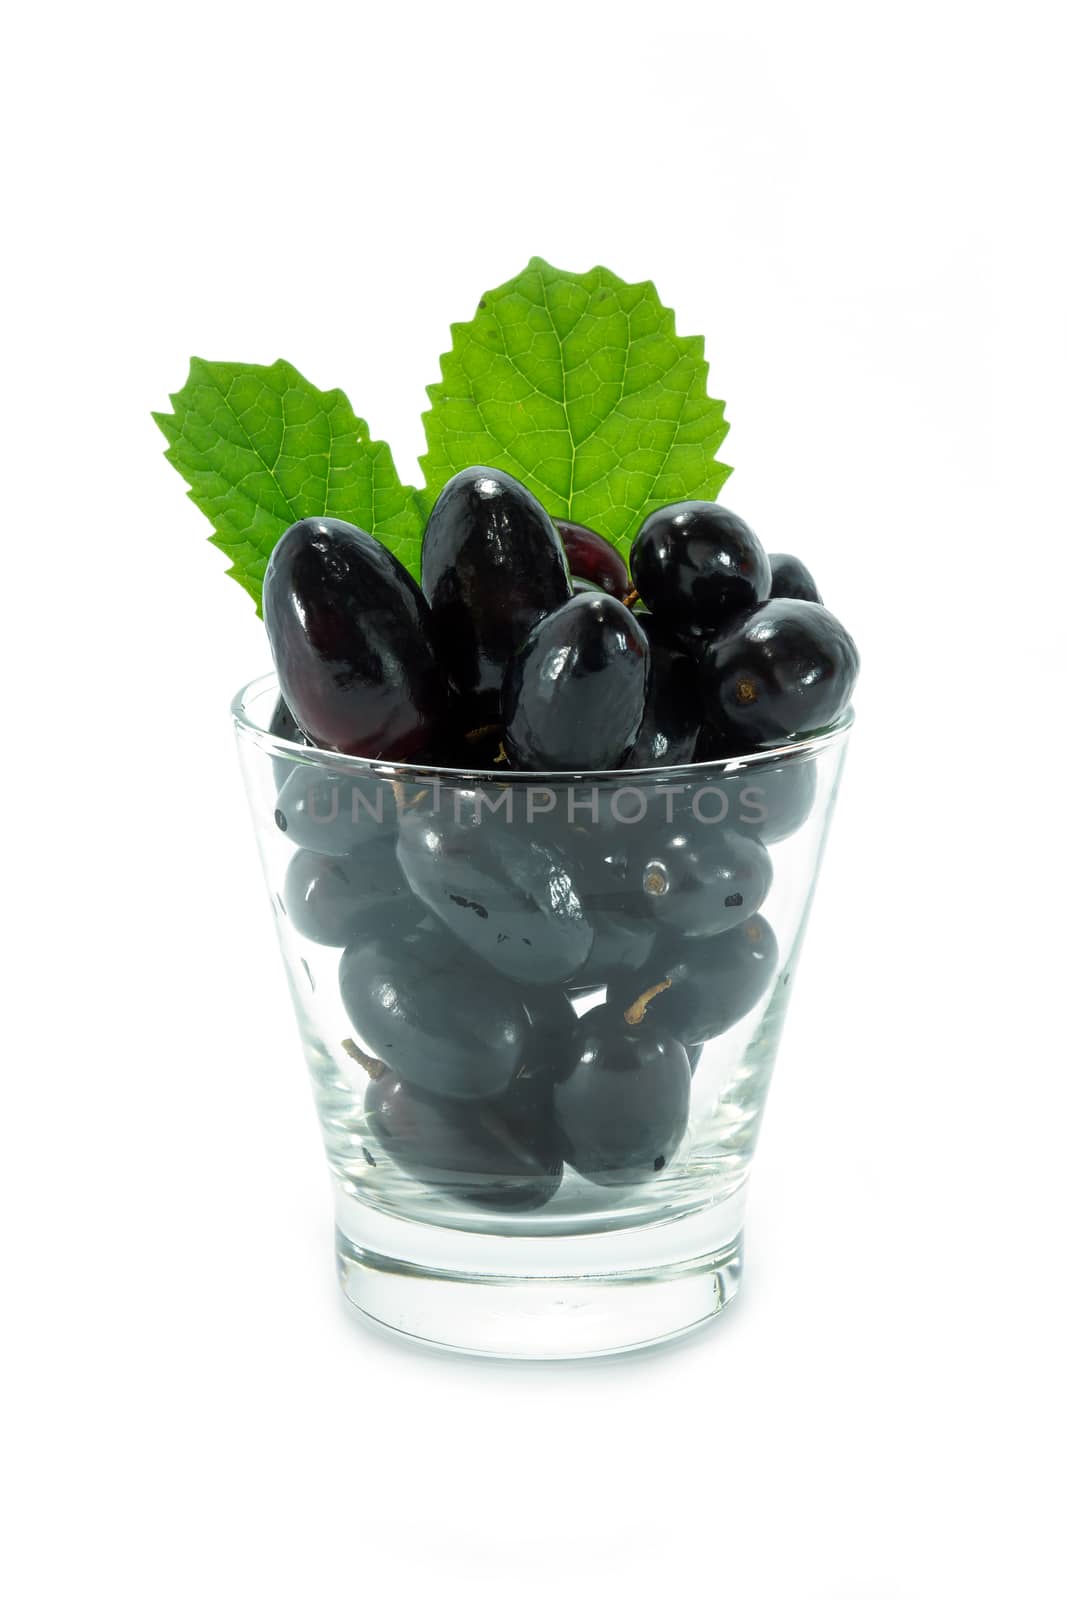 Black grapes in a glass isolated on a white background.